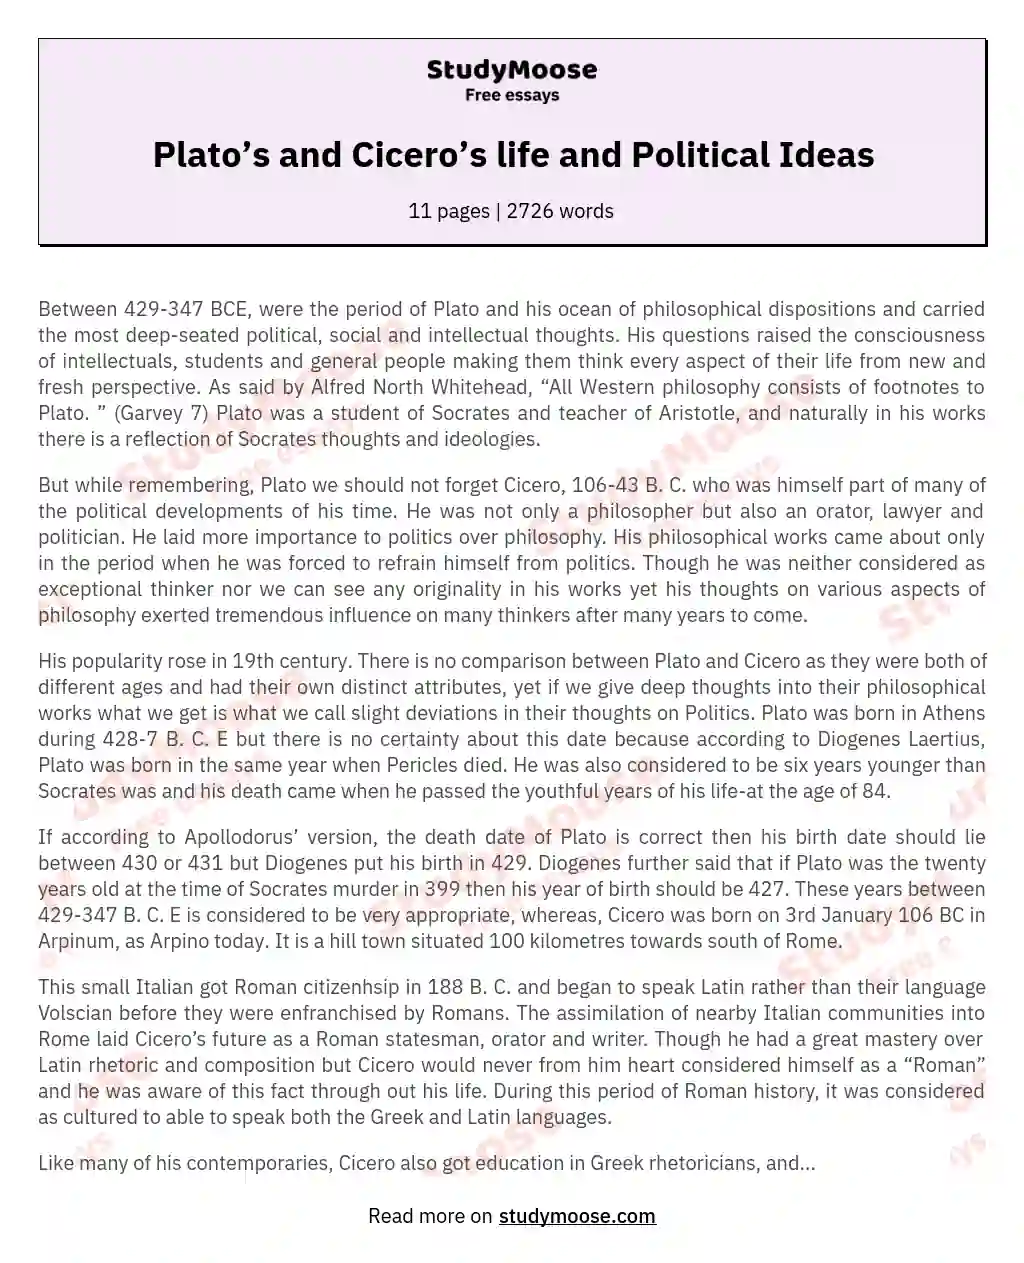 Plato’s and Cicero’s life and Political Ideas